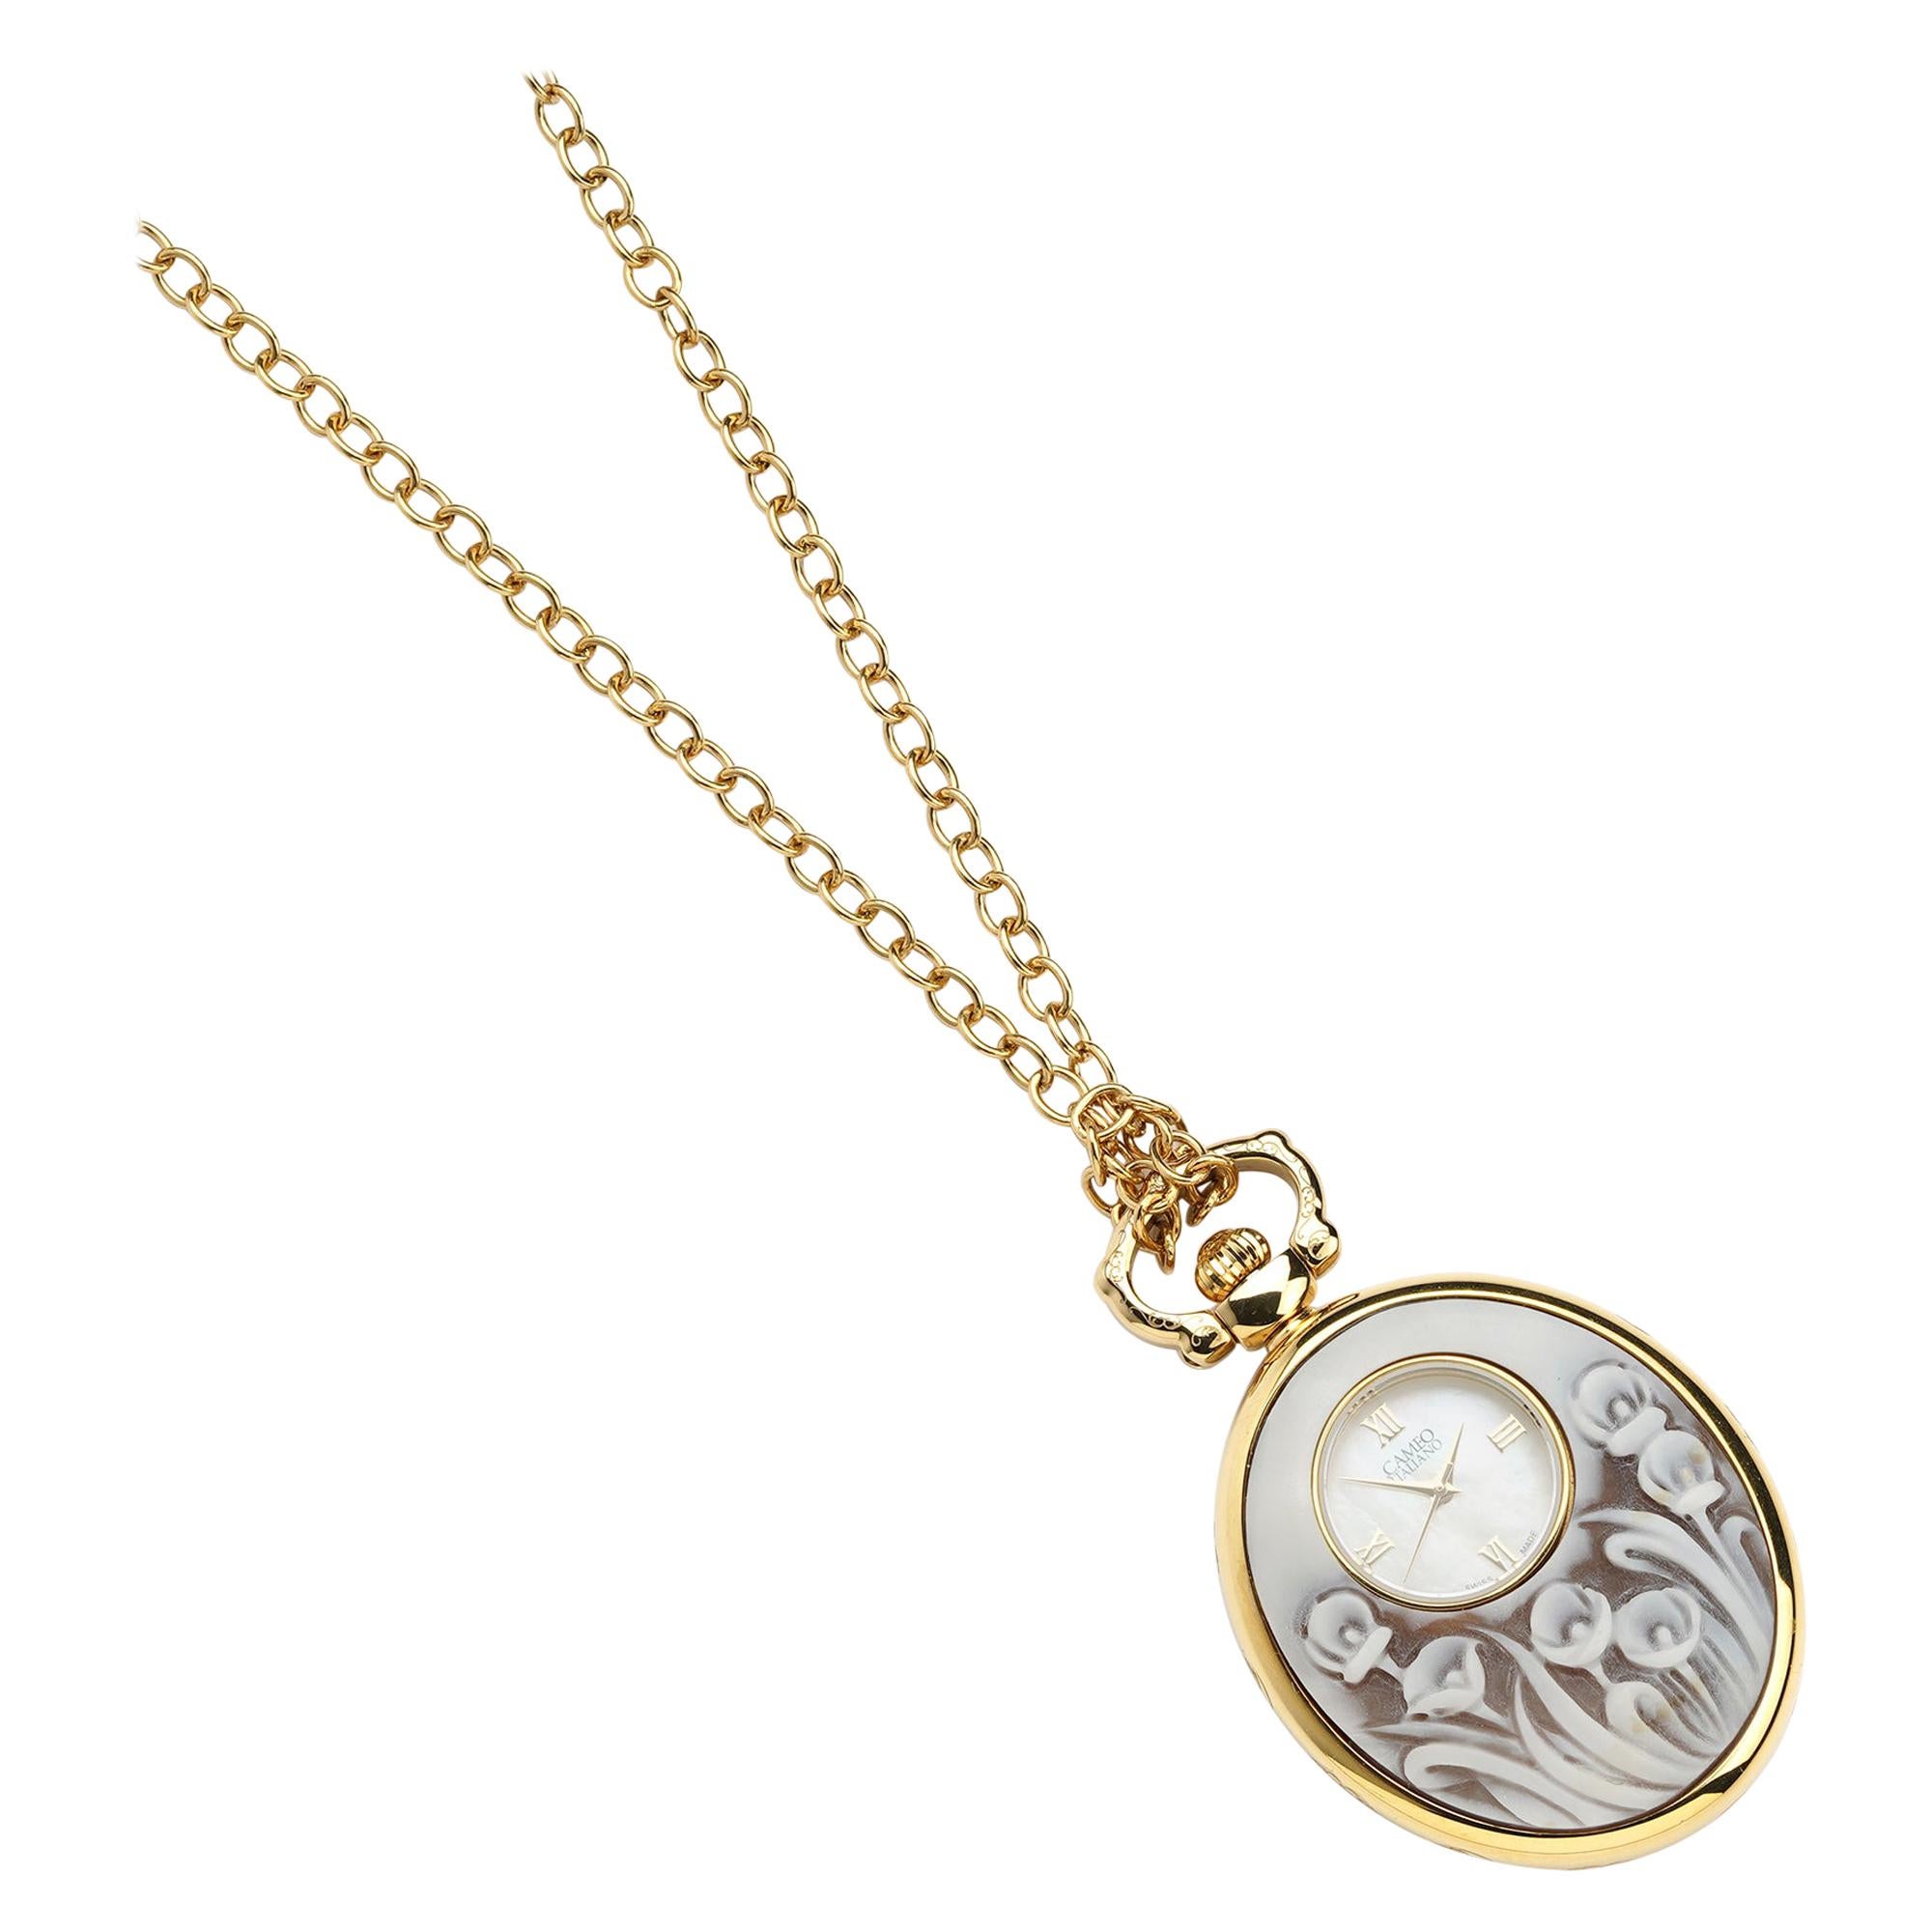 Stainless Steel Pendant Watch with Sea Shell Cameos PVD Treated